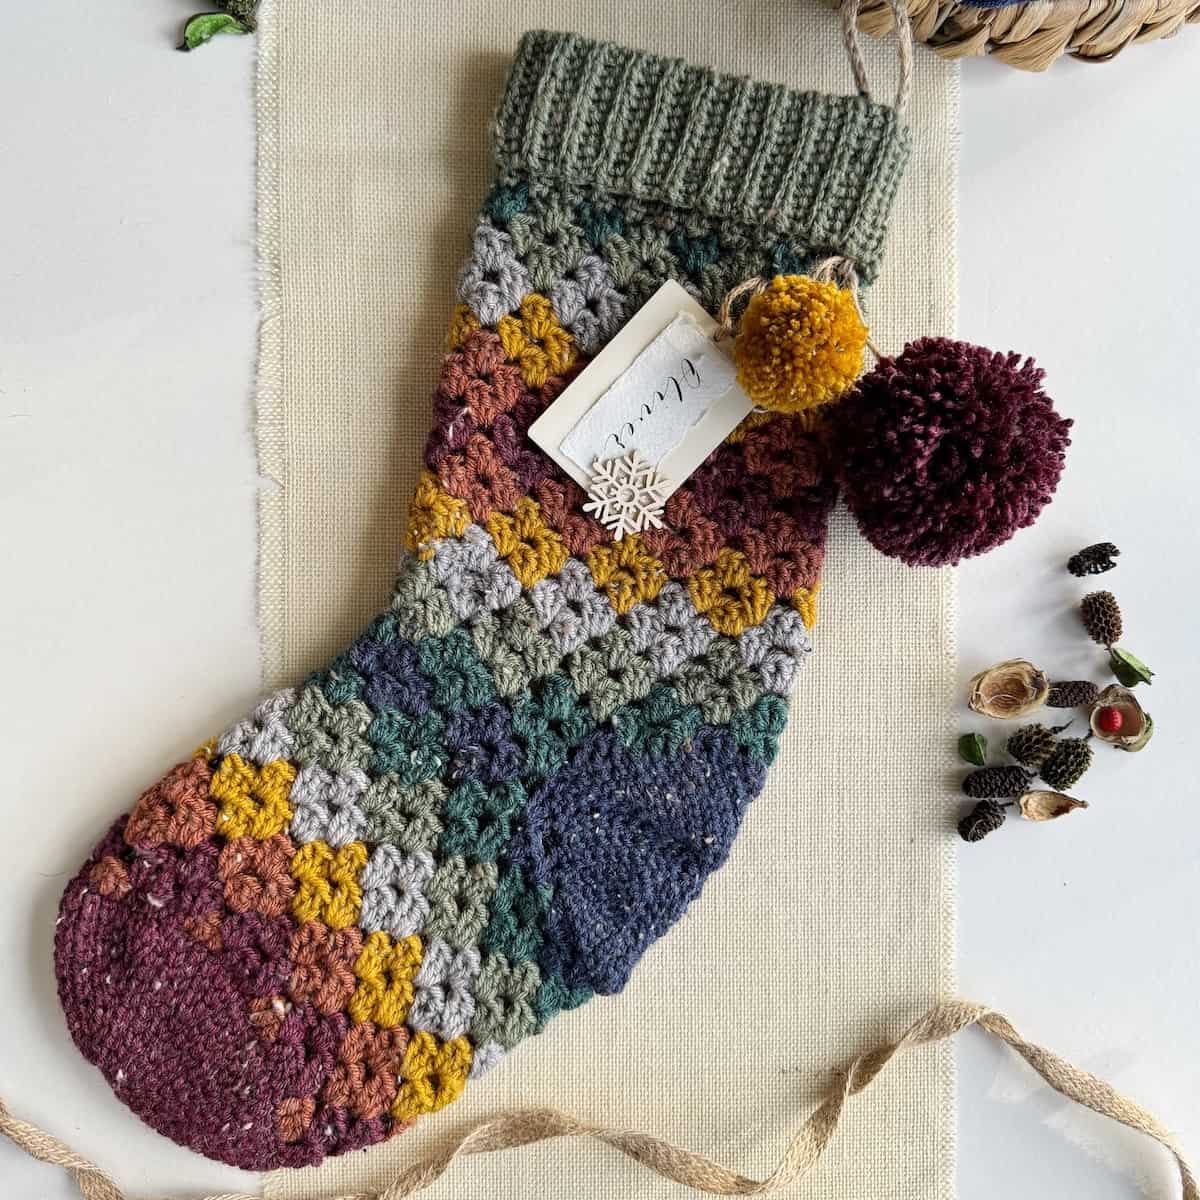 A crocheted christmas stocking with pom poms.